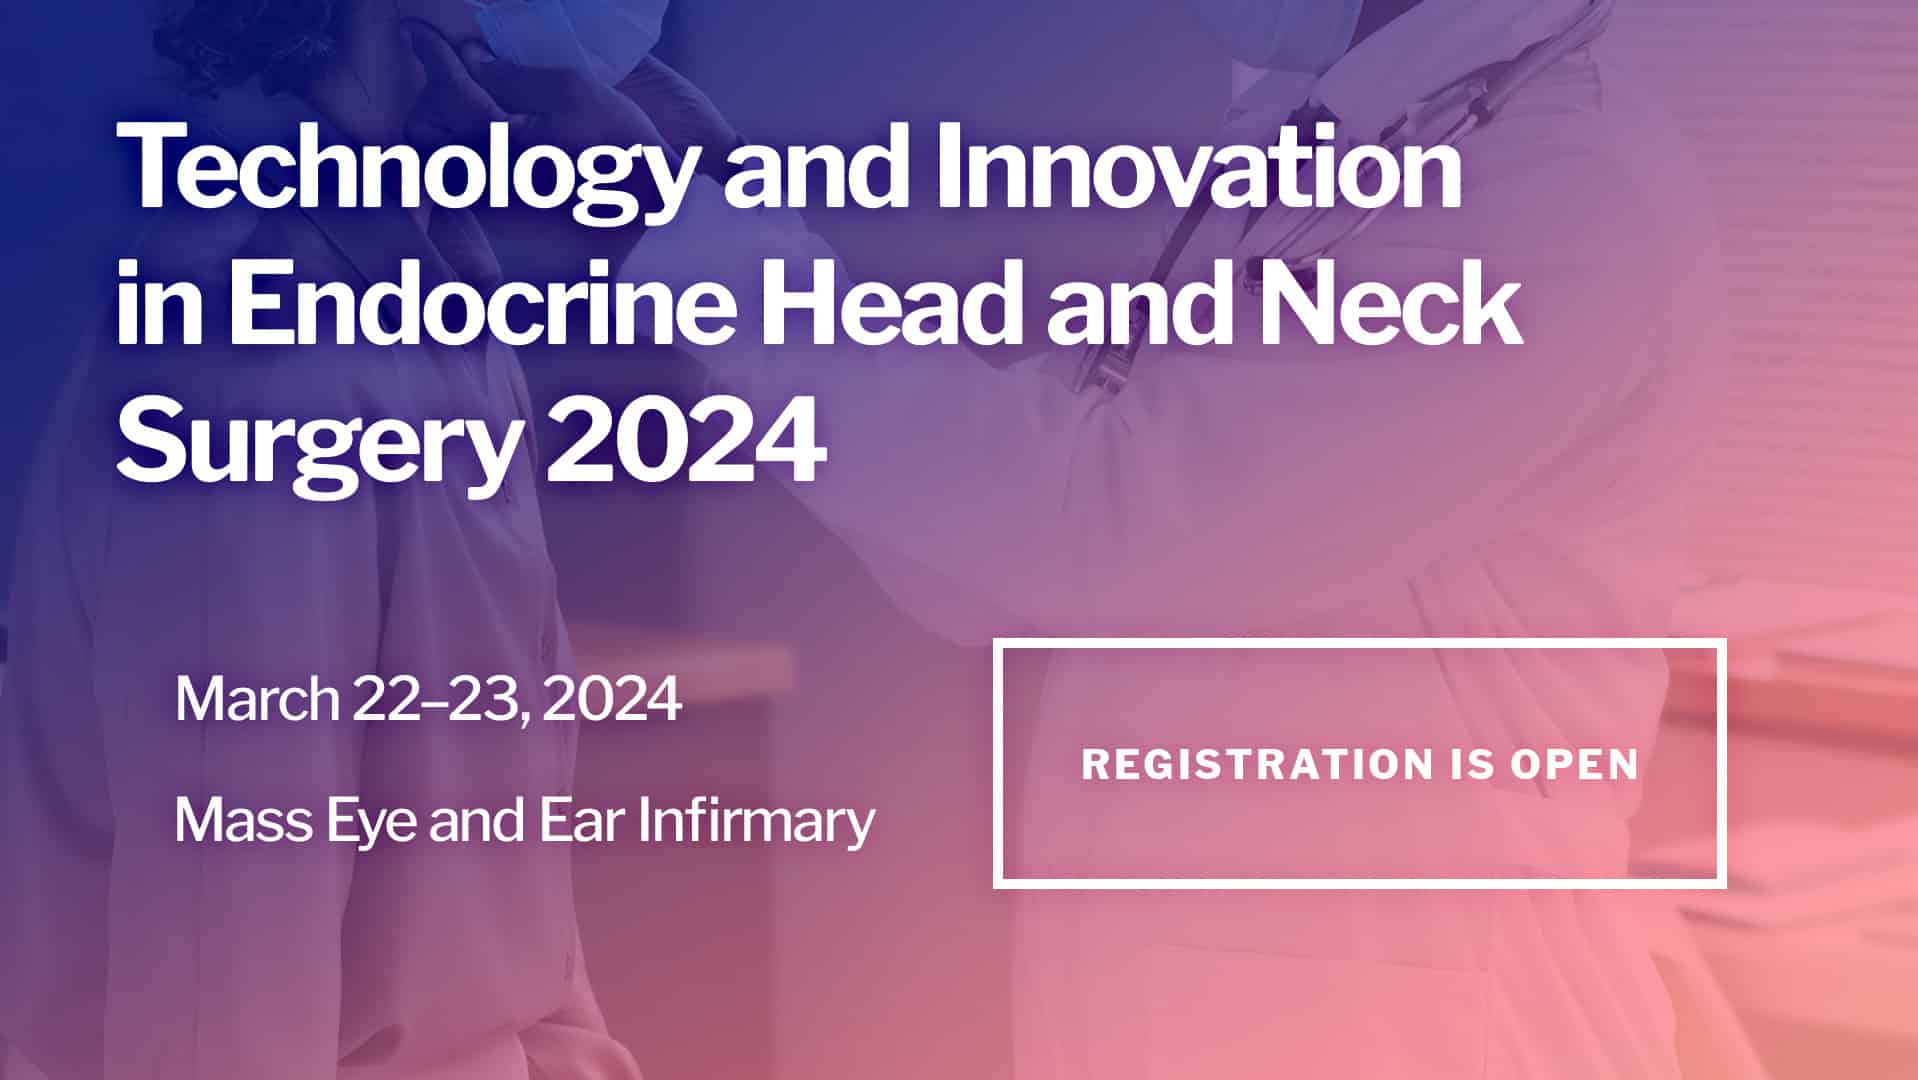 Register Now - Technology and Innovation in Endocrine Head and Neck Surgery 2024